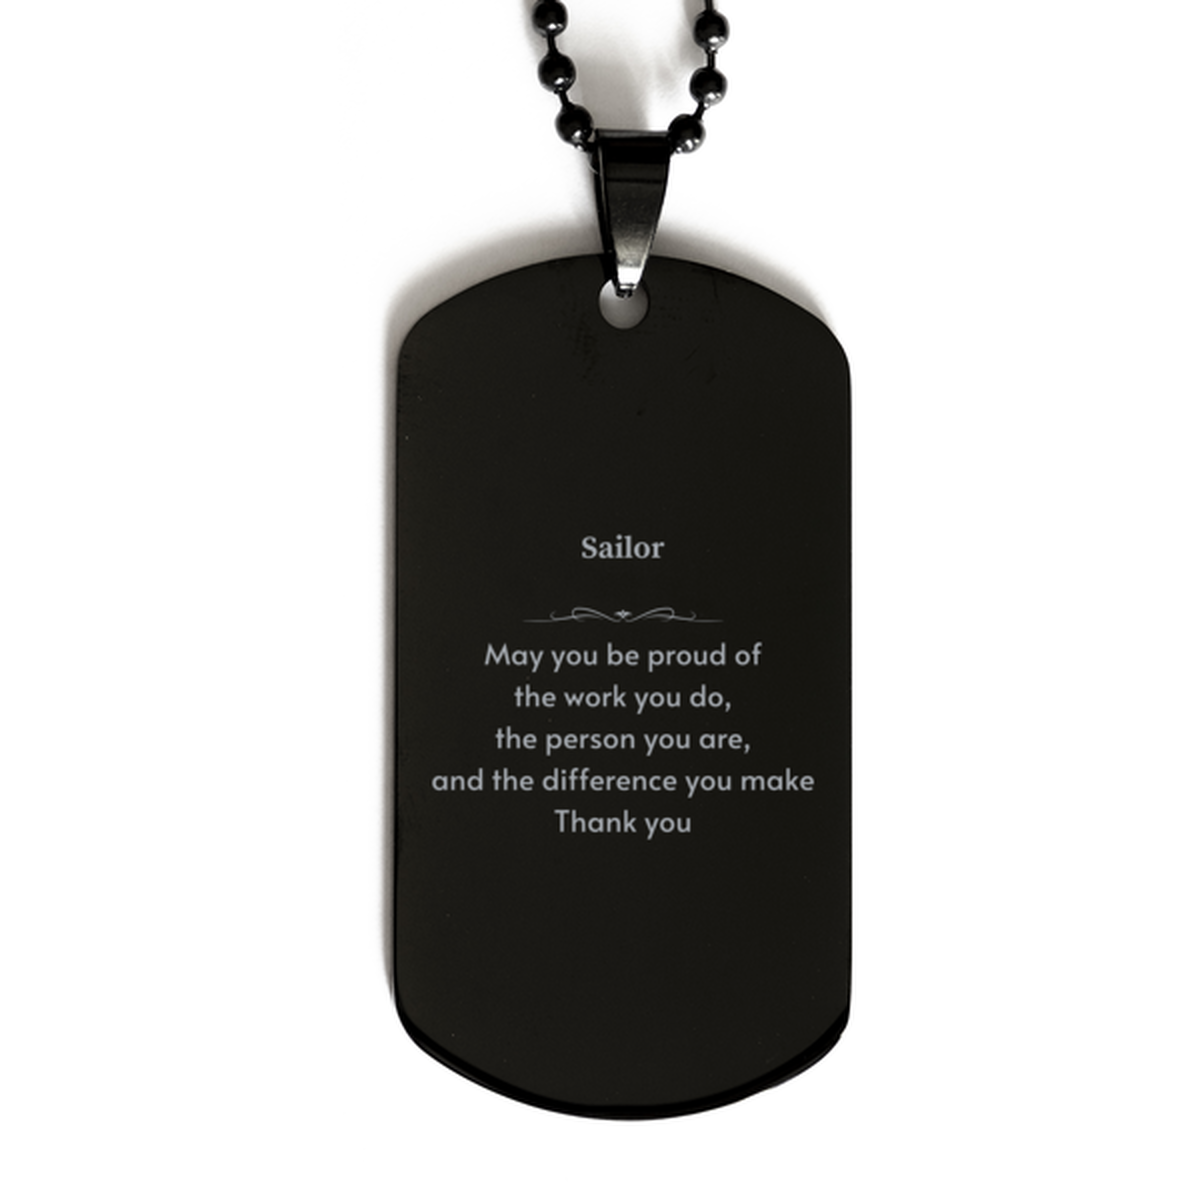 Heartwarming Black Dog Tag Retirement Coworkers Gifts for Sailor, Sailor May You be proud of the work you do, the person you are Gifts for Boss Men Women Friends